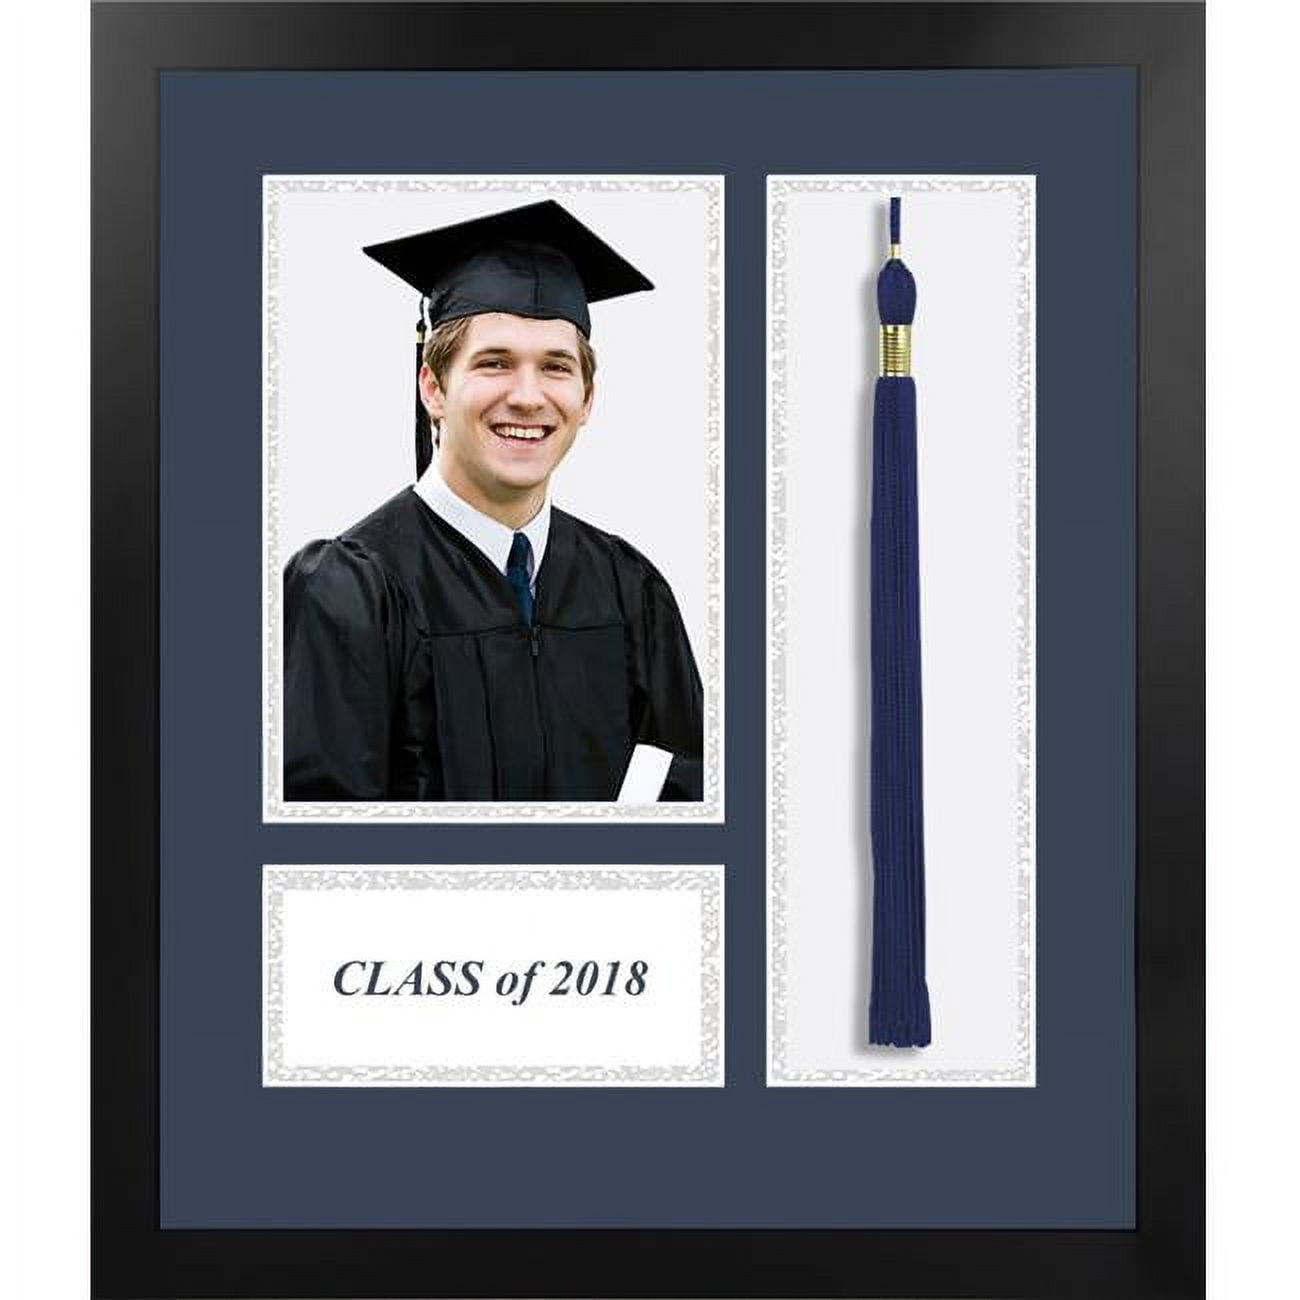 Acfmbkns18 2018 Academic Black Photo Frame, Navy & Silver Matting With Tassel Opening 5 X 7 In. Photo Opening